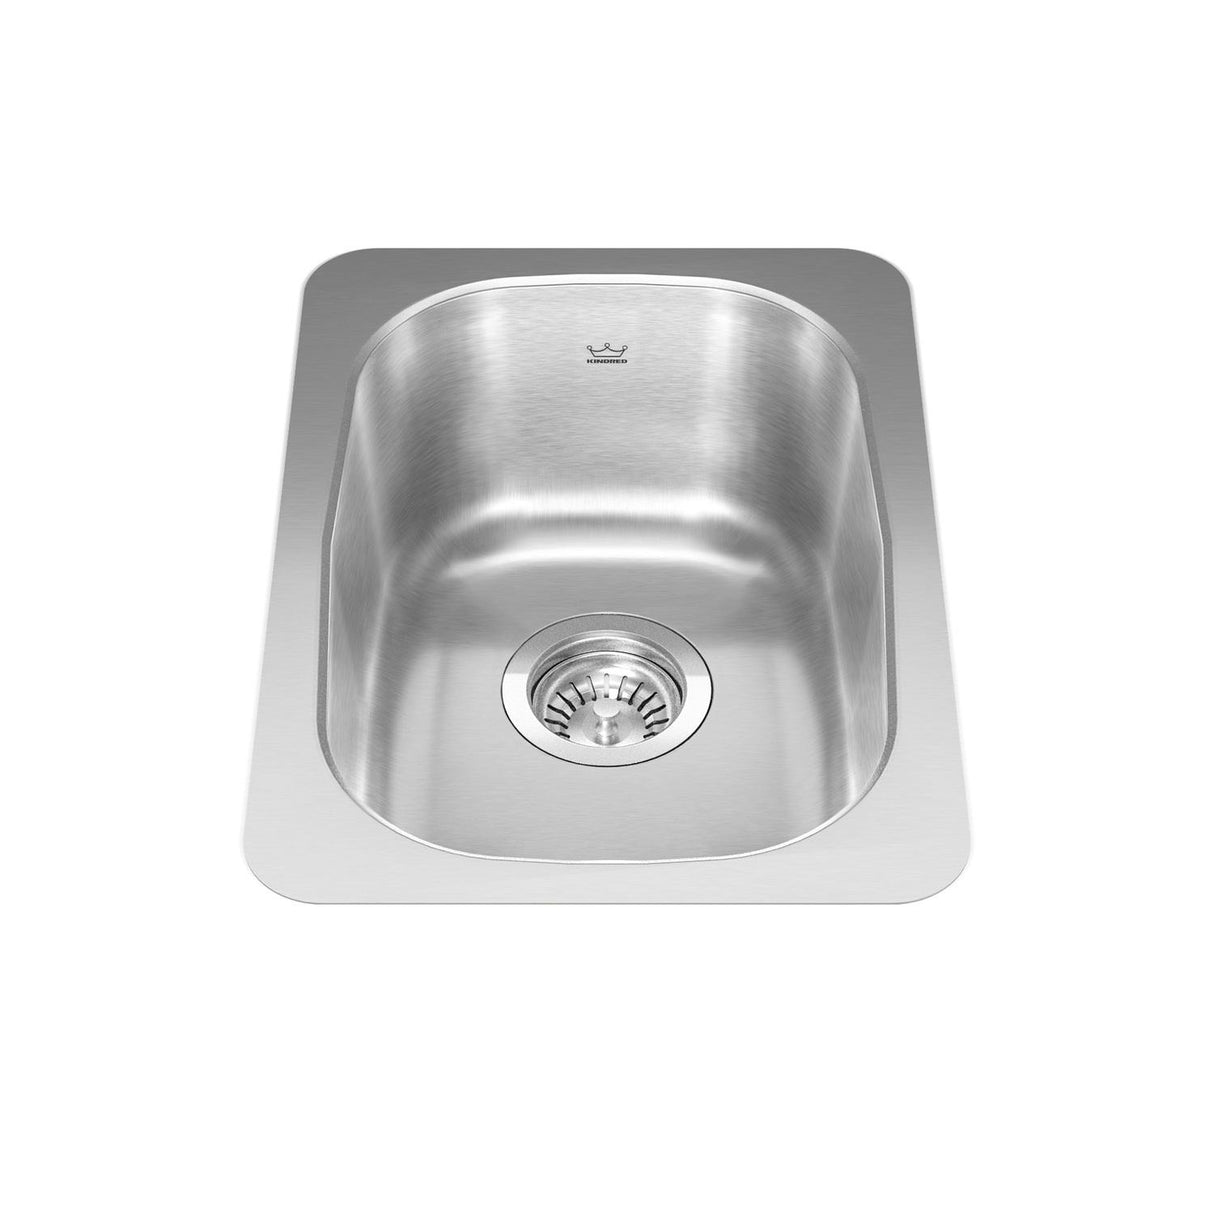 KINDRED NS1813U-7N Reginox 12.38-in LR x 18.13-in FB x 7-in DP Undermount Single Bowl Stainless Steel Hospitality Sink In Linear brushed Bowl with Silk Finished Rim